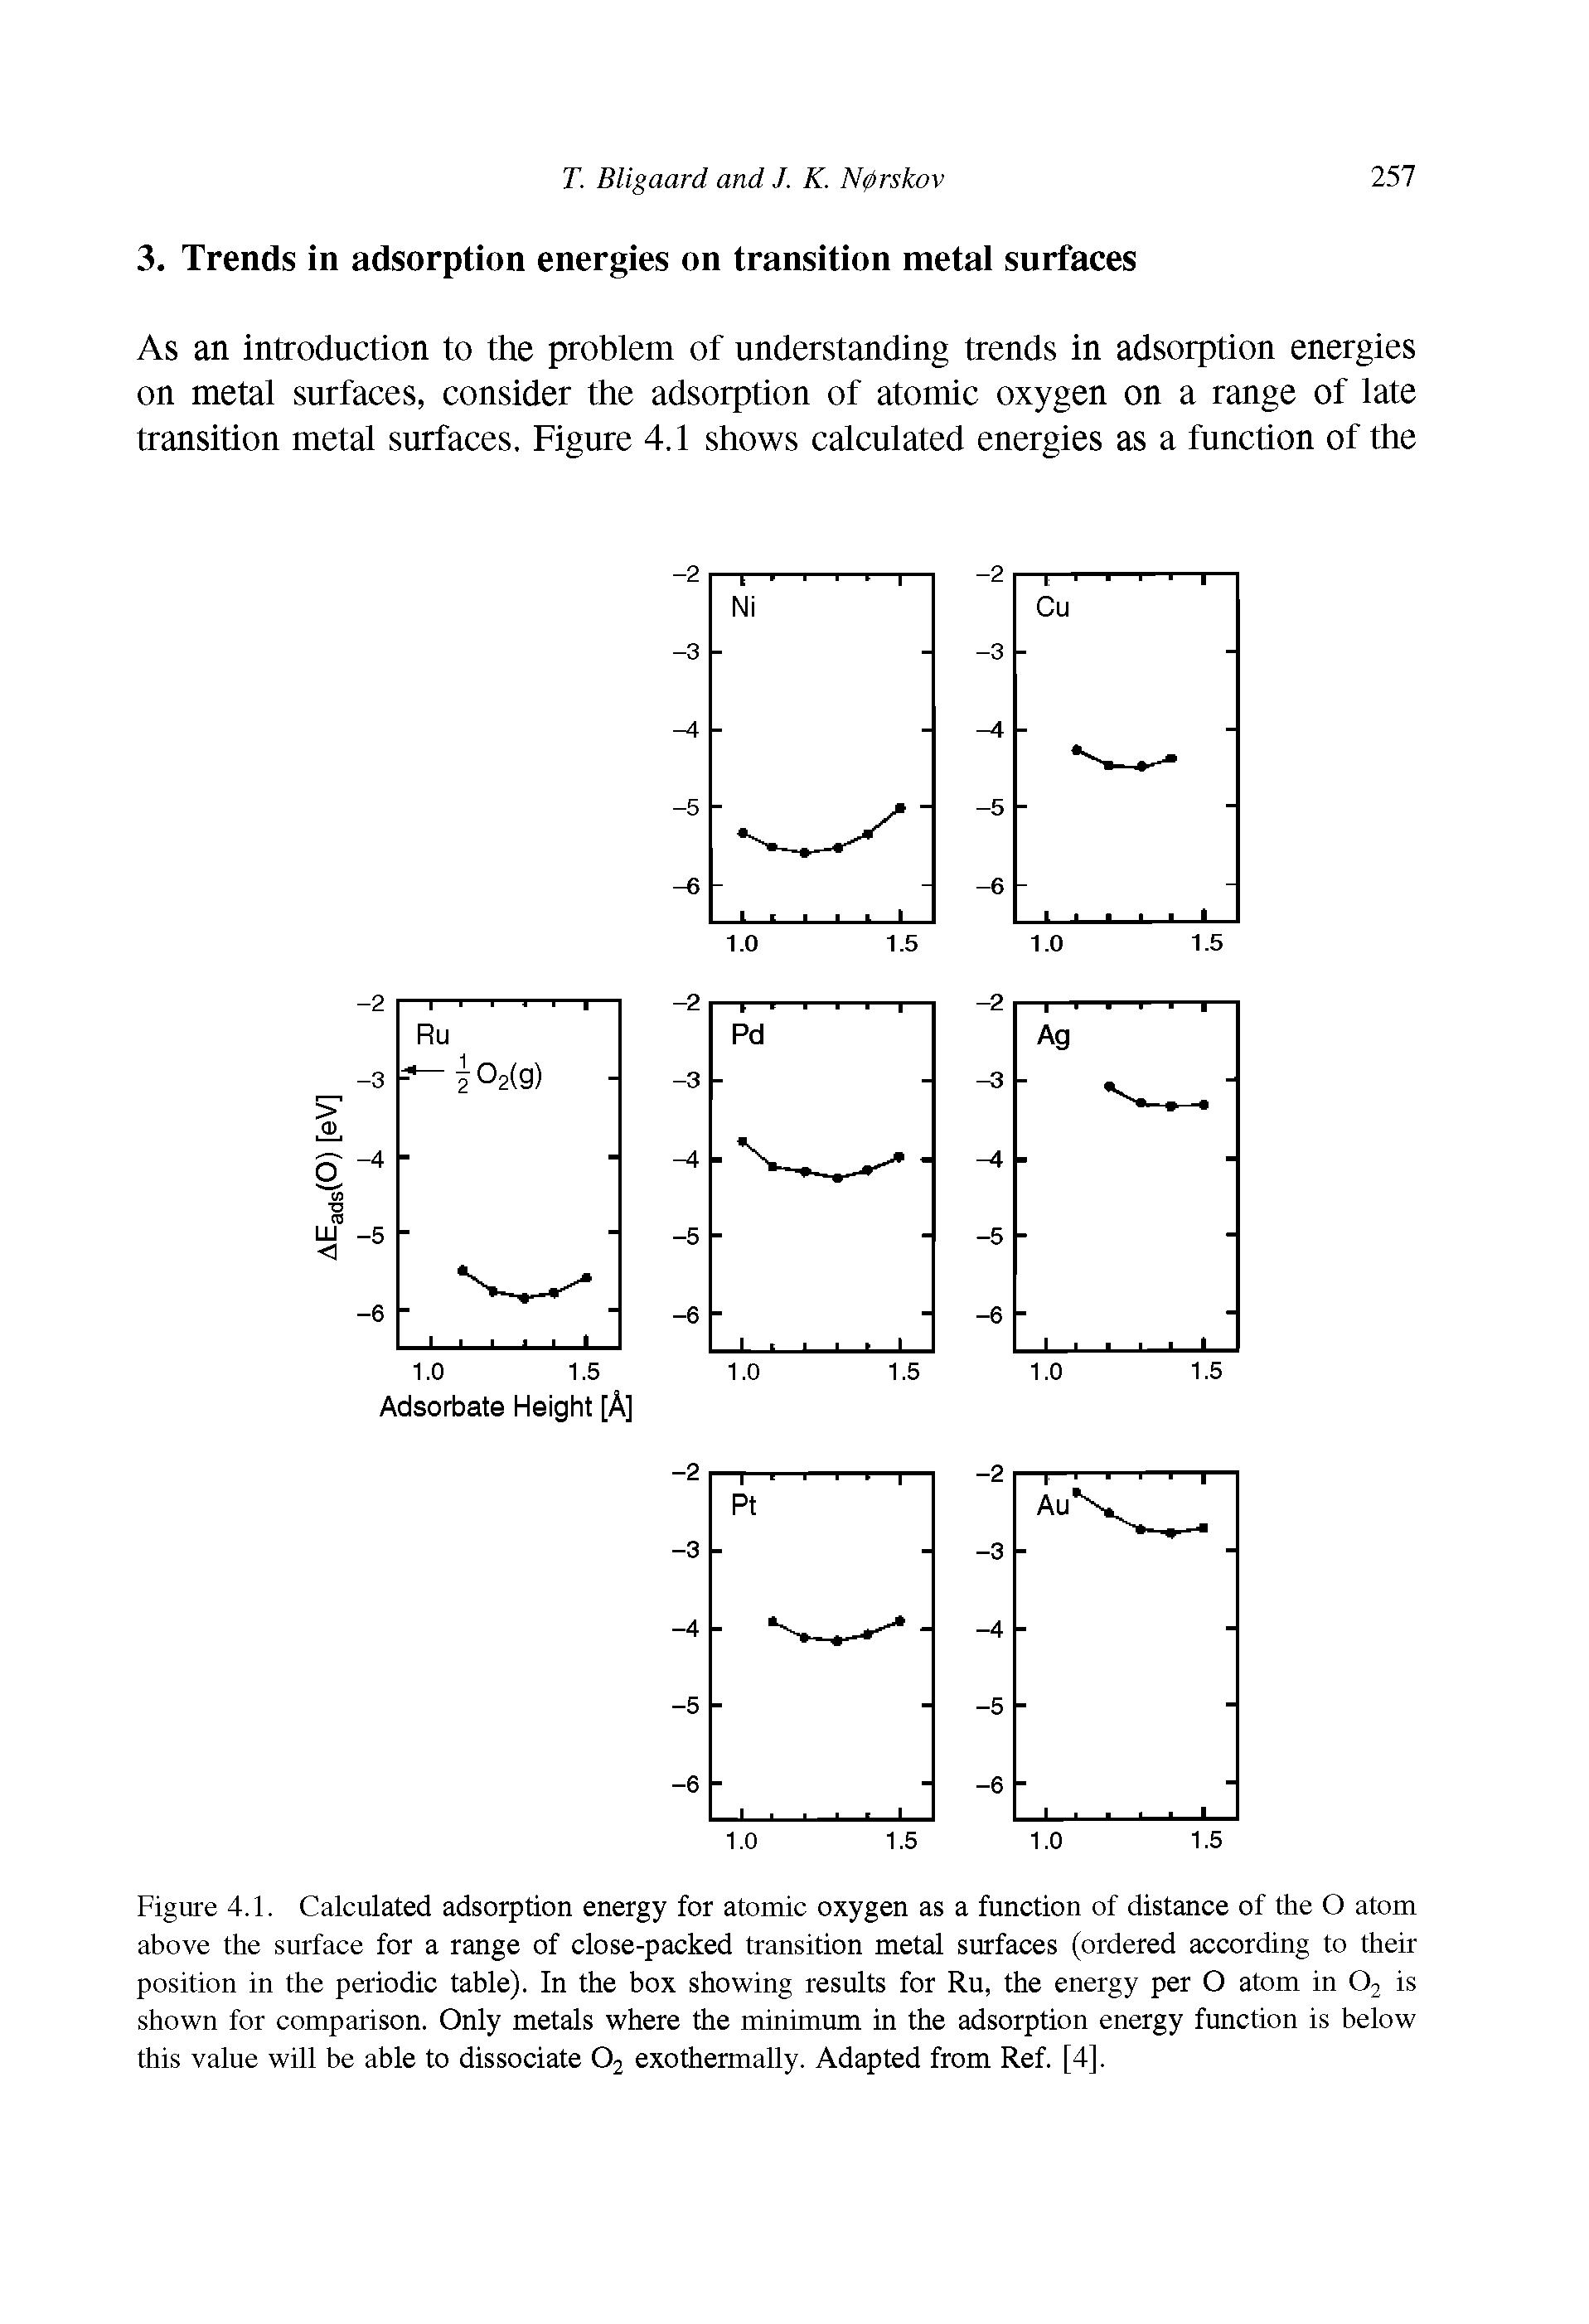 Figure 4.1. Calculated adsorption energy for atomic oxygen as a function of distance of the atom above the surface for a range of close-packed transition metal surfaces (ordered according to their position in the periodic table). In the box showing results for Ru, the energy per atom in 02 is shown for comparison. Only metals where the minimum in the adsorption energy function is below this value will be able to dissociate 02 exothermally. Adapted from Ref. [4].